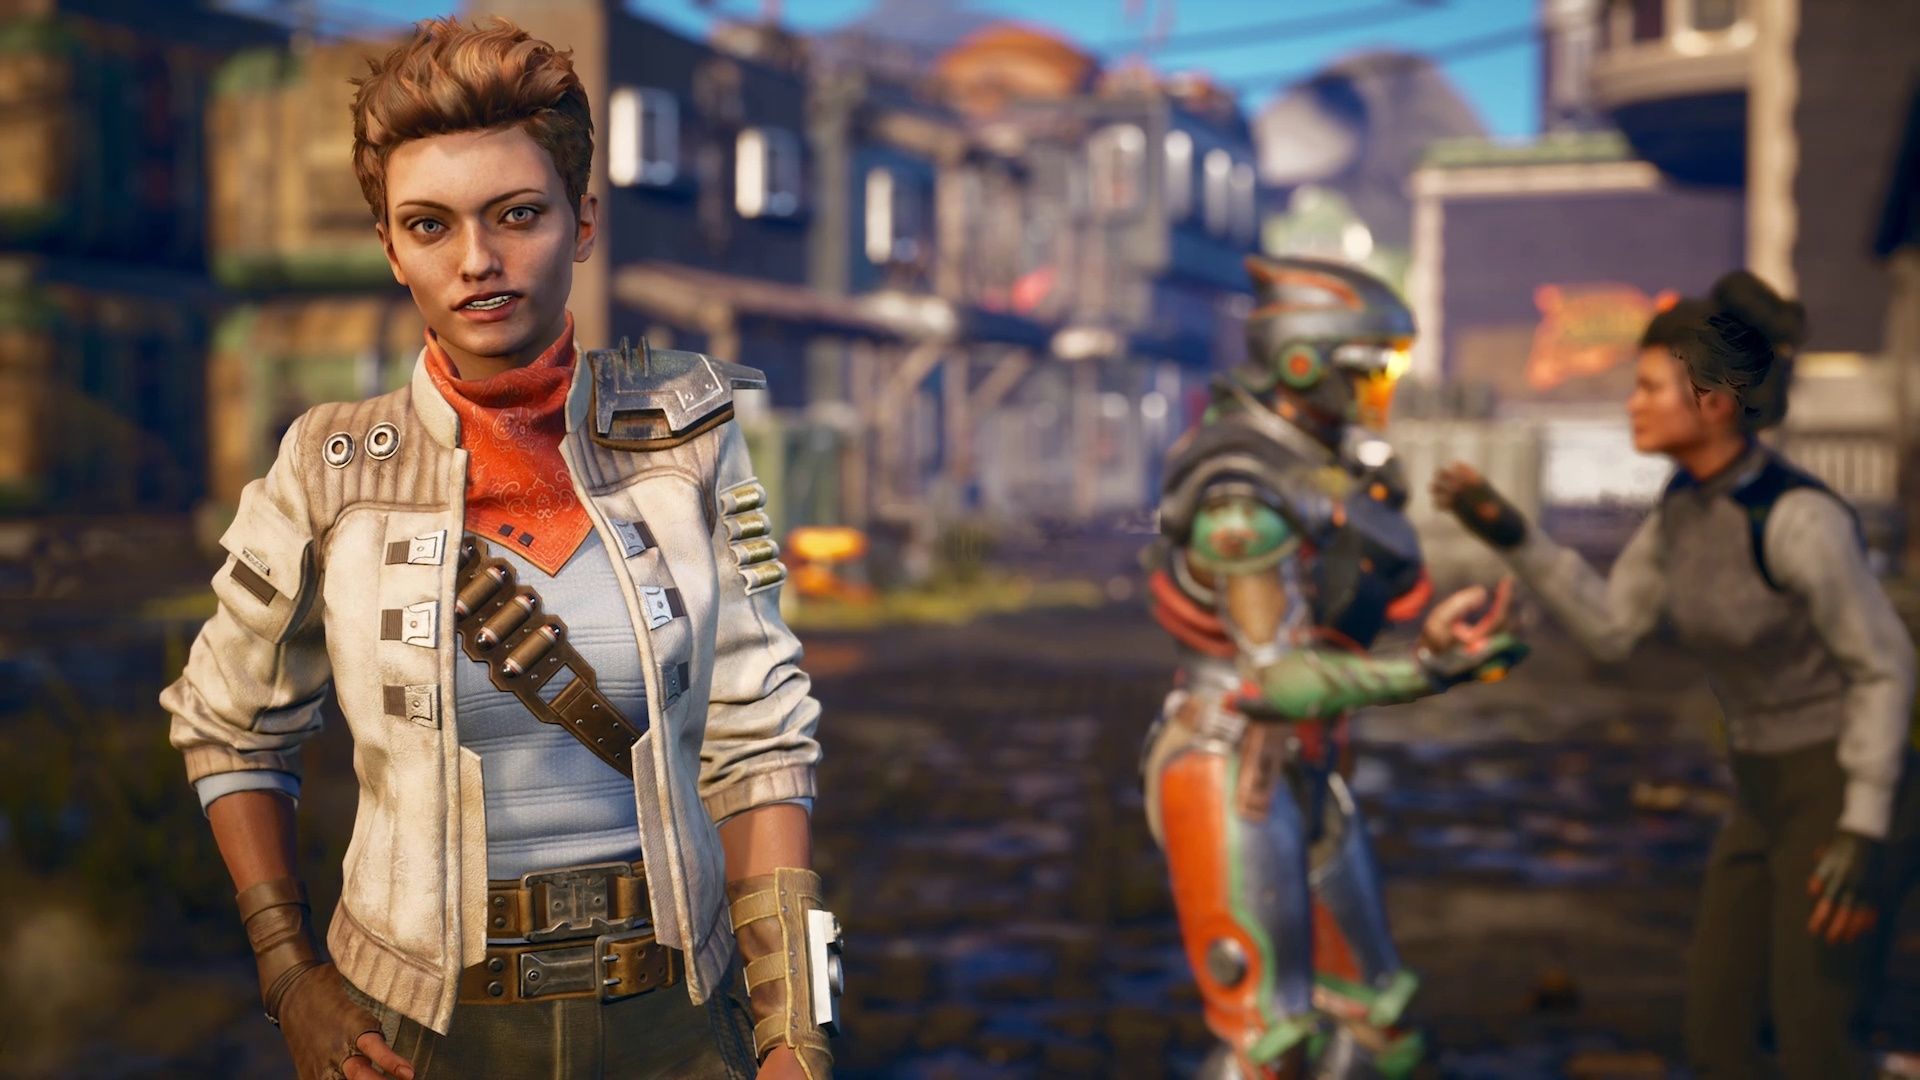 The Outer Worlds Ps4